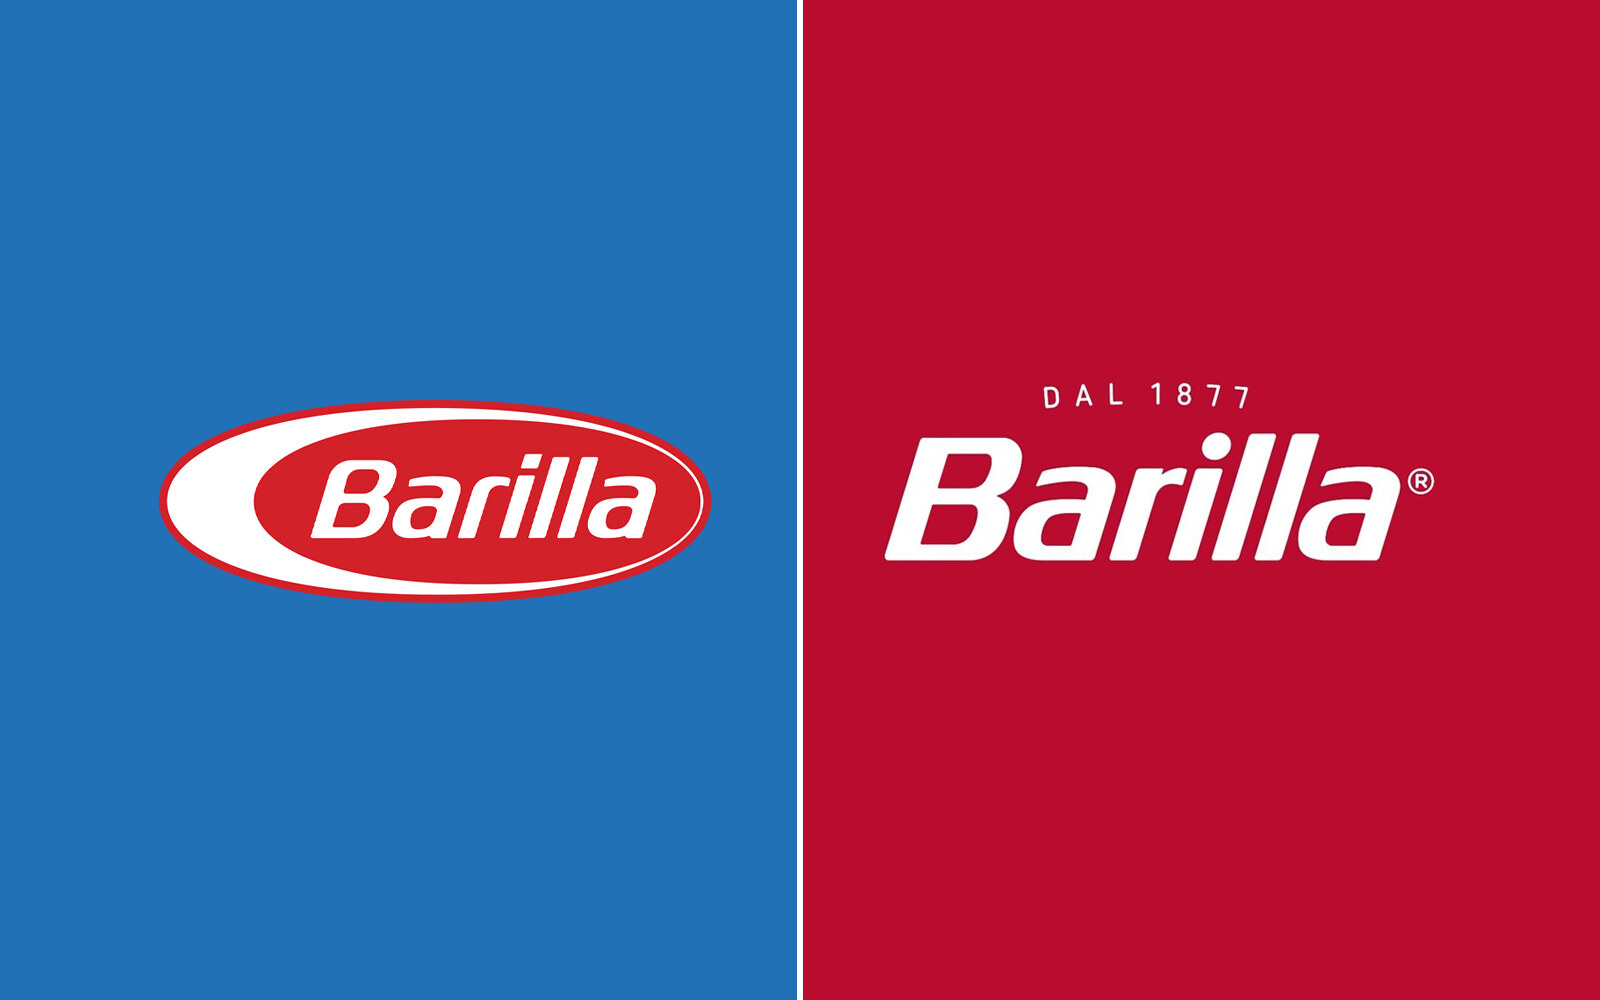 A new logo for the 145th anniversary of Barilla